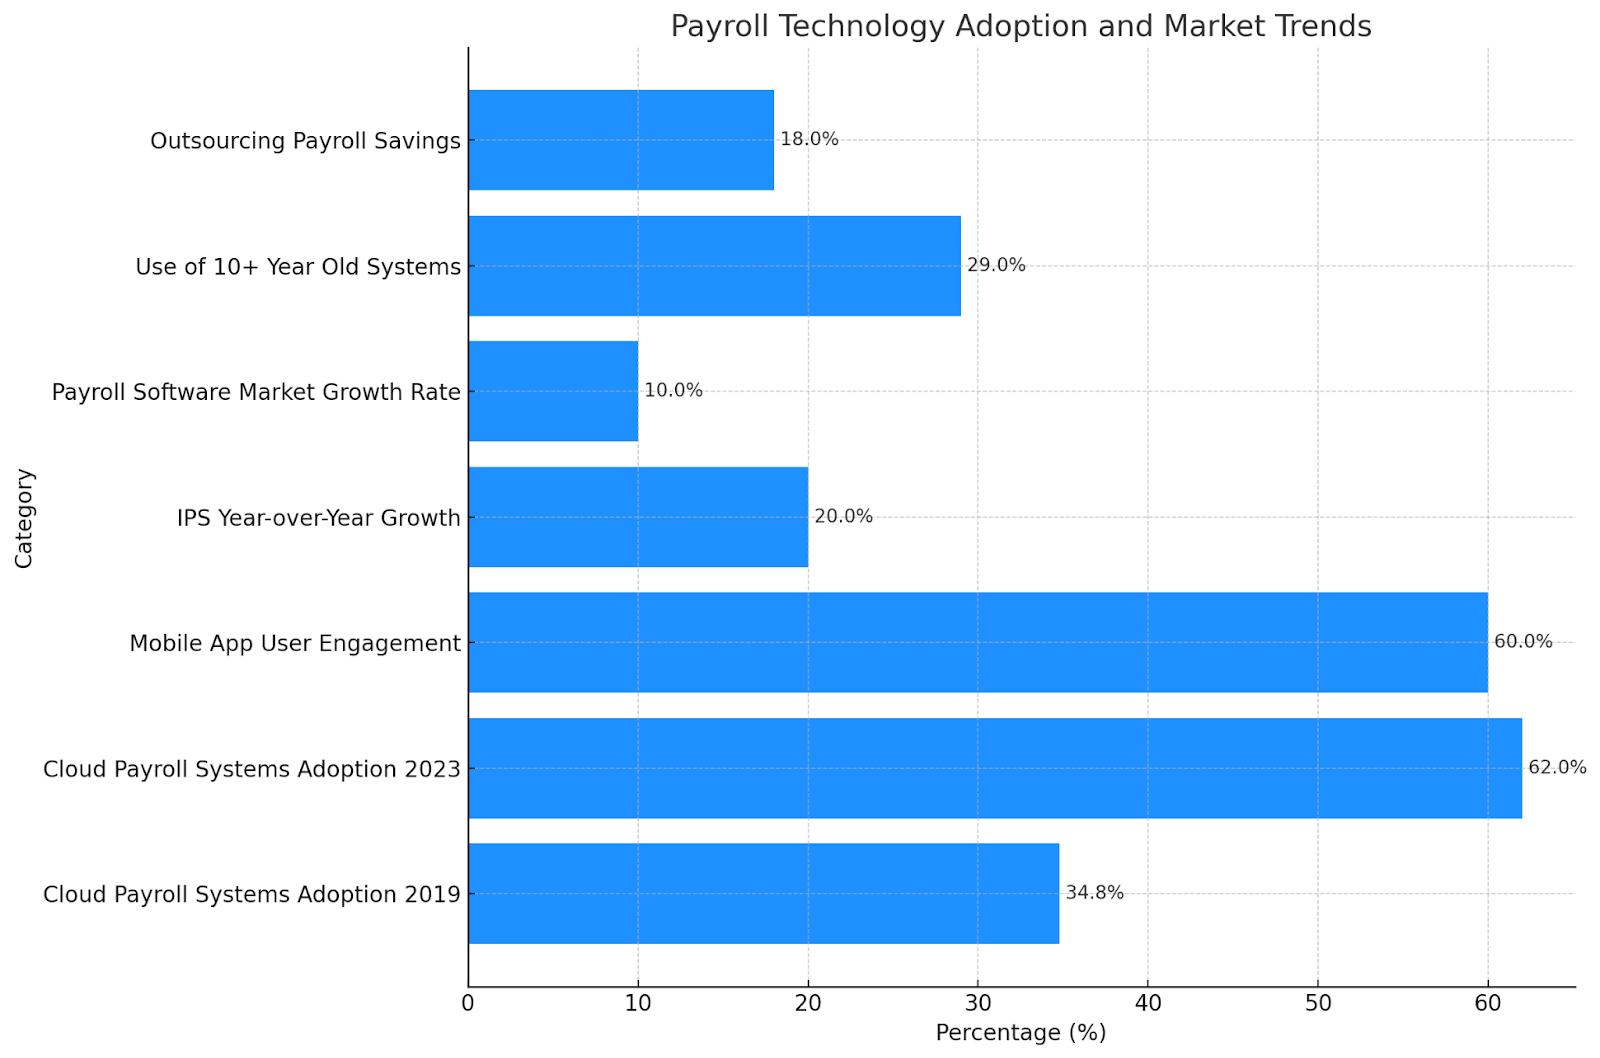 Bar chart illustrating the adoption rates of different payroll technologies in the United States. Design by NRS